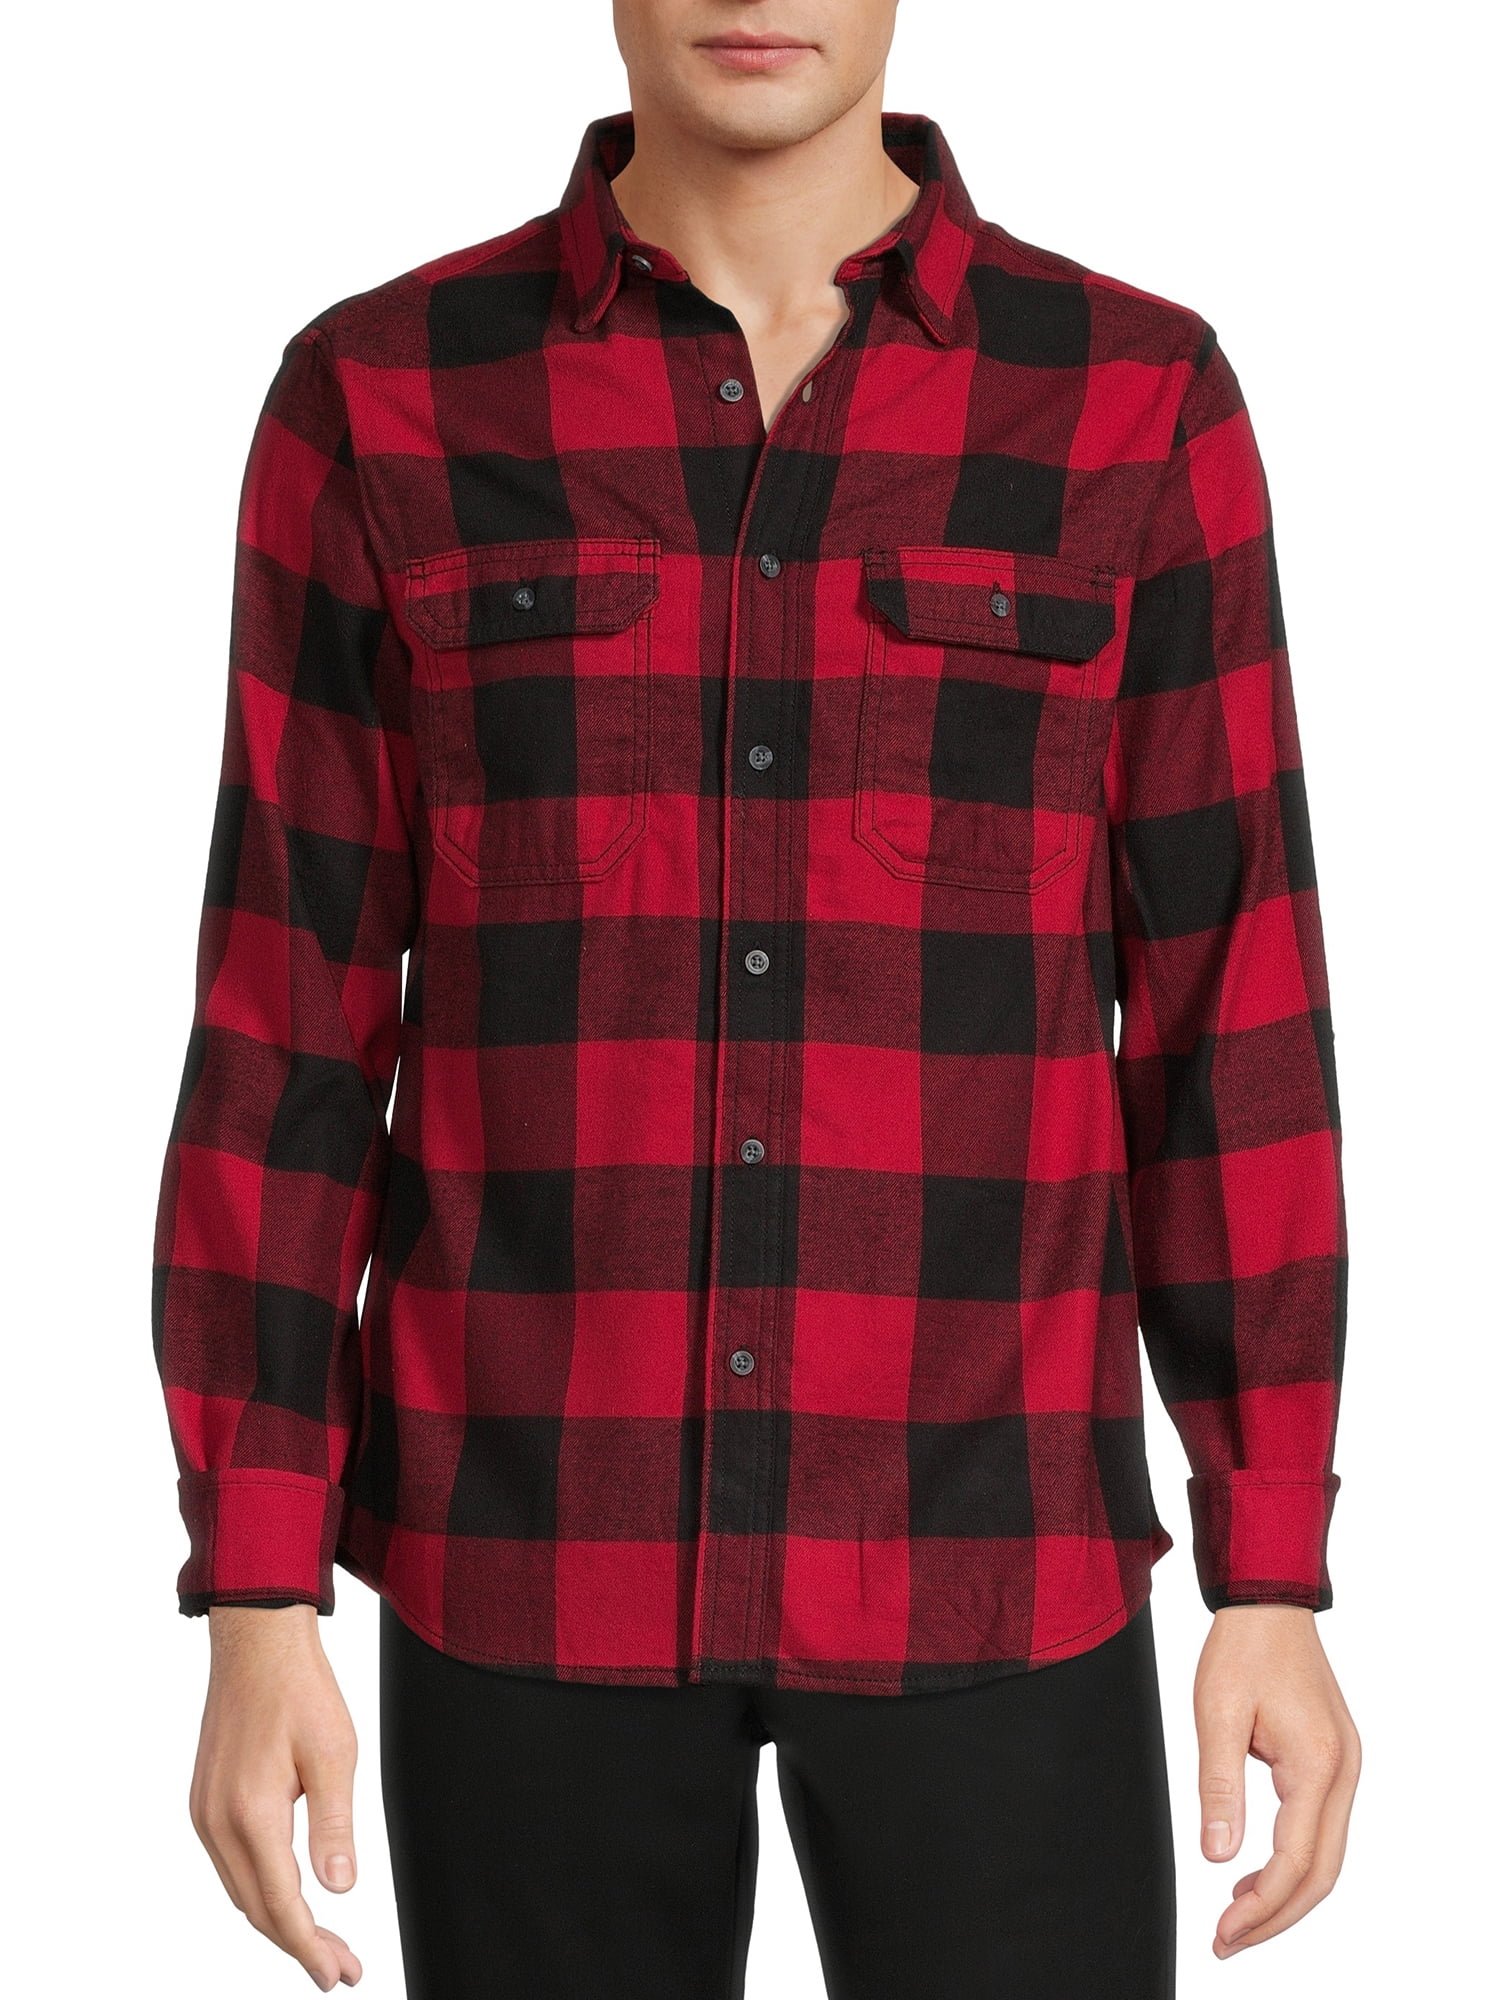 Traditional Flannel Shirt 24S Men Clothing Shirts Casual Shirts 